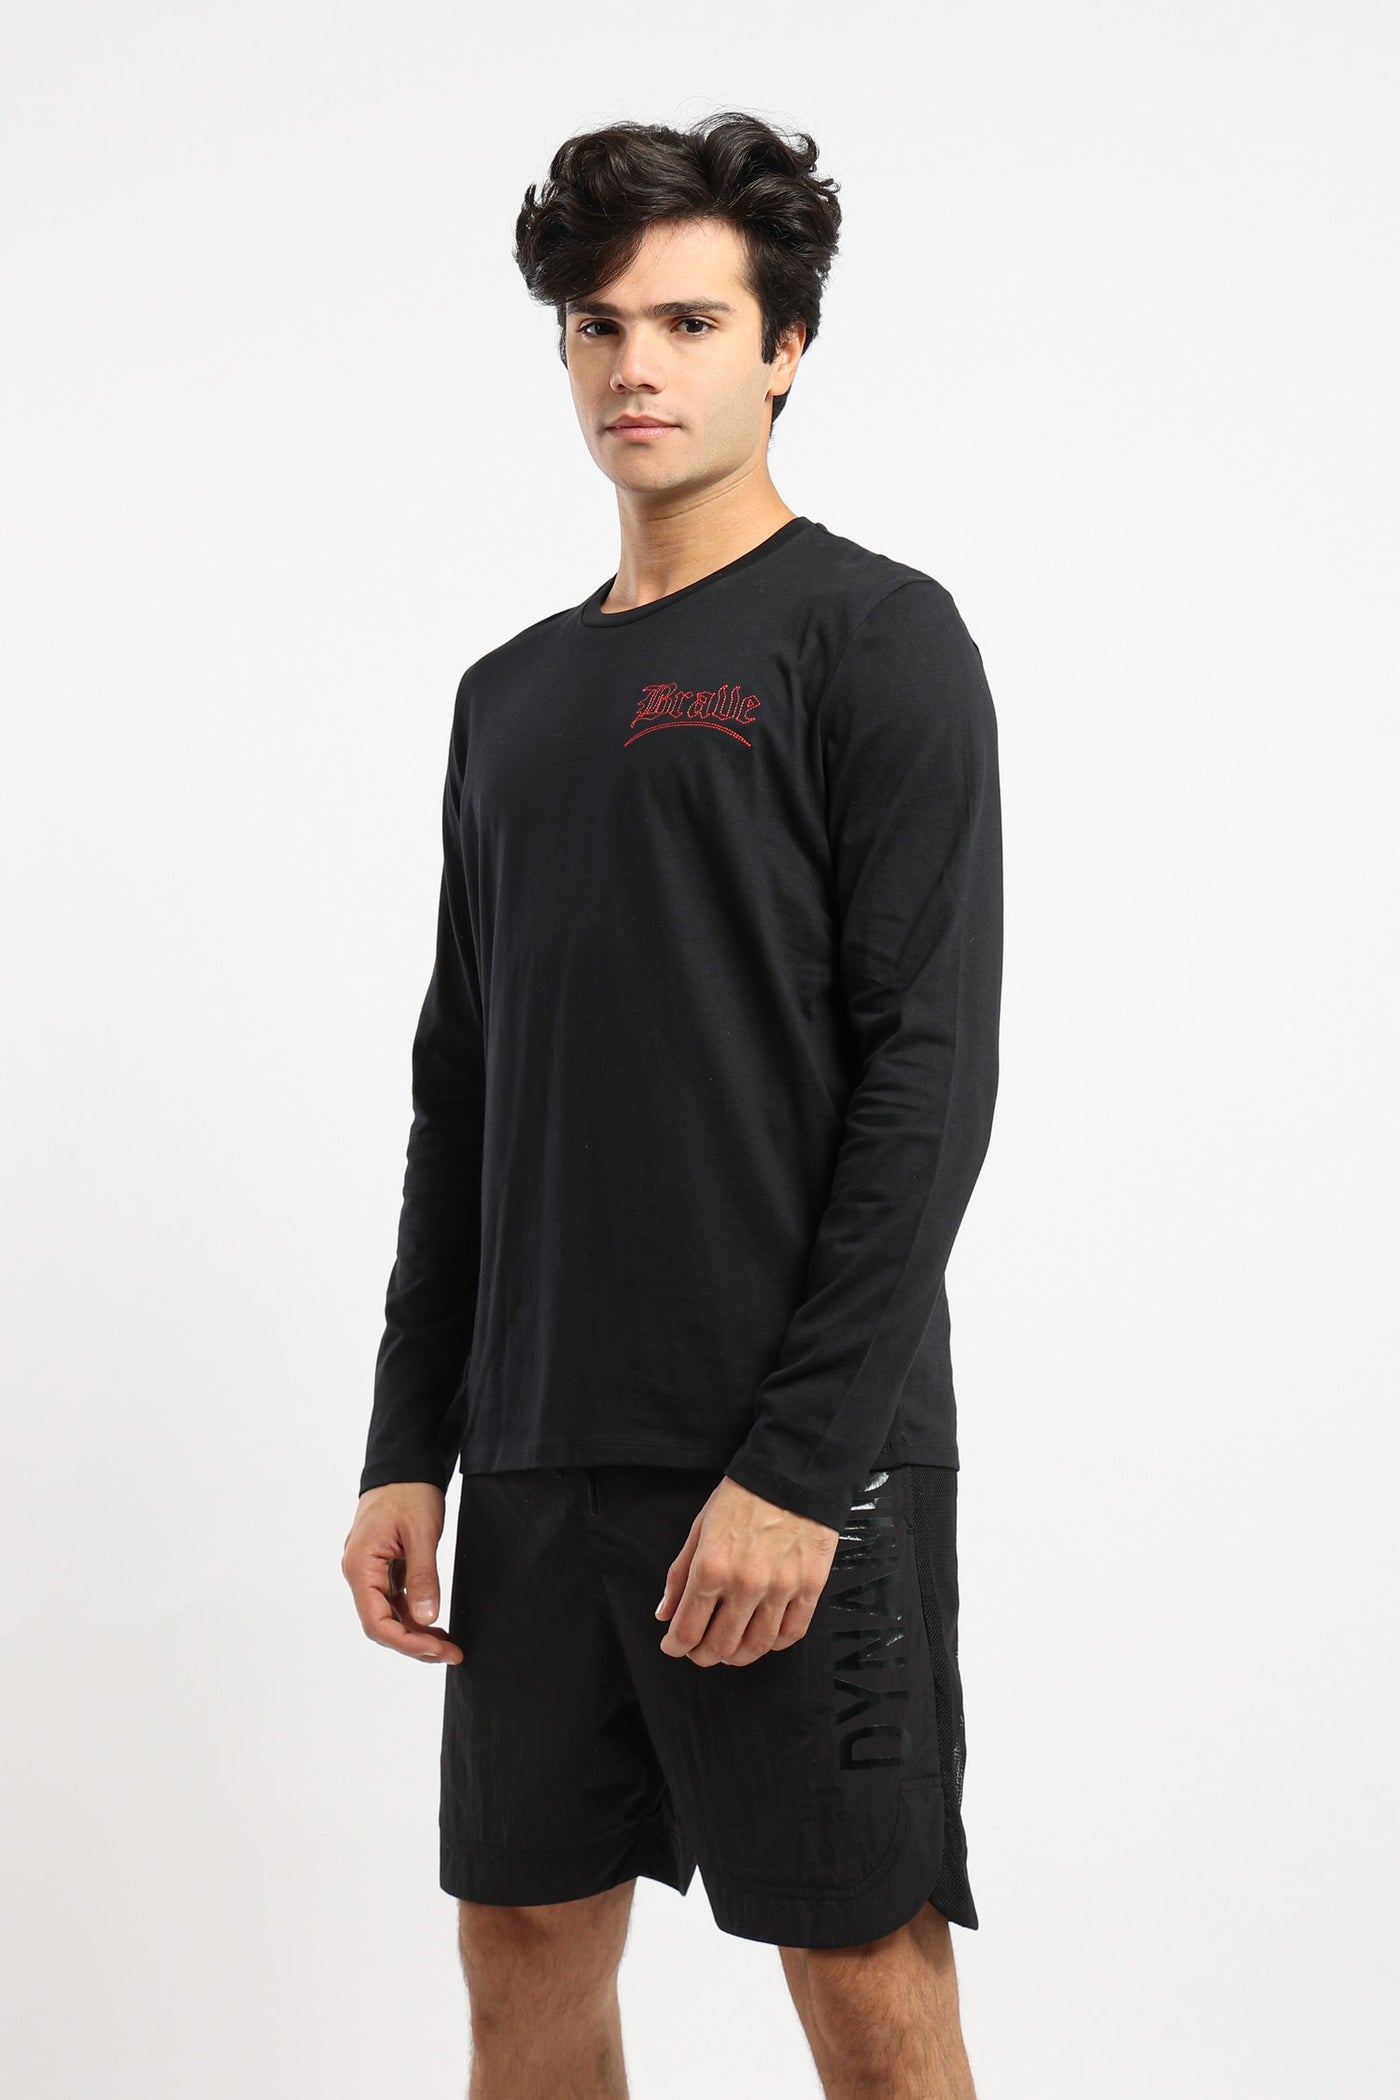 T-Shirt - Long Sleeves - Chest and Back Print